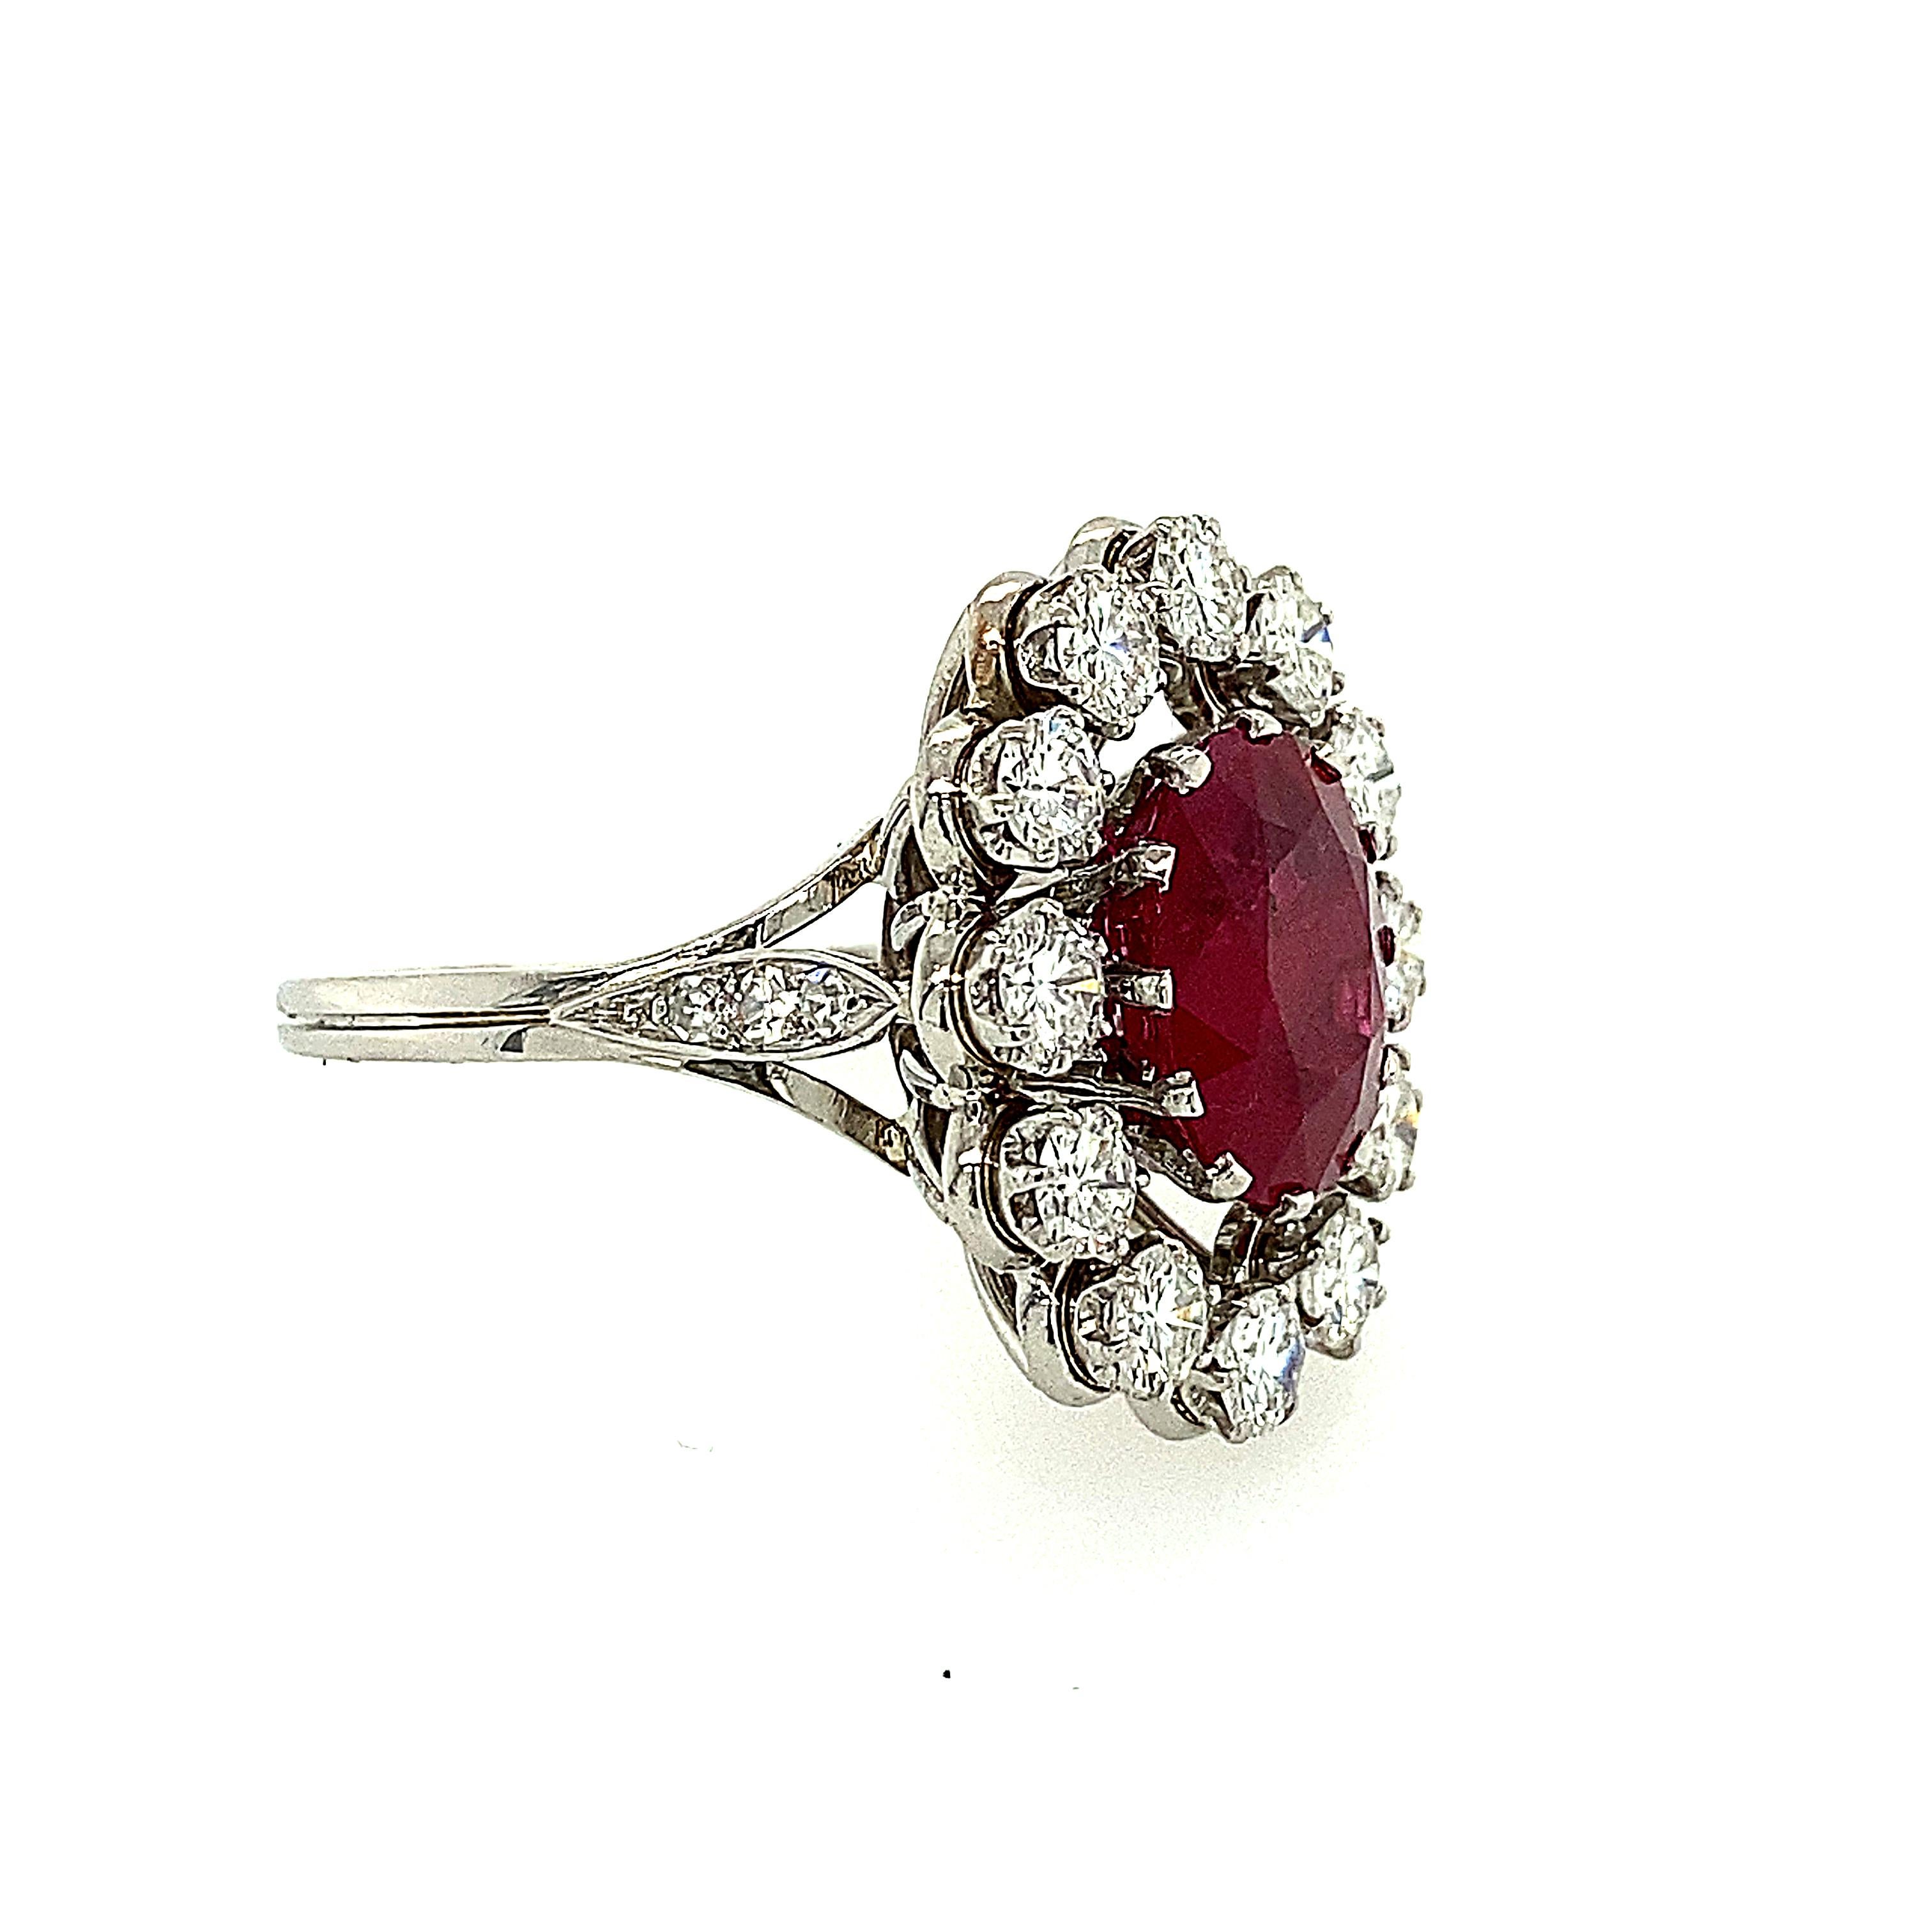 Fabulous AGL Certified Burma origin ruby weighing 3.76 carats. There are approximately 1.30 carats of round brilliant diamonds surrounding the Ruby. The ring is platinum and circa 1940-1950. The Ruby has an AGL Certificate.